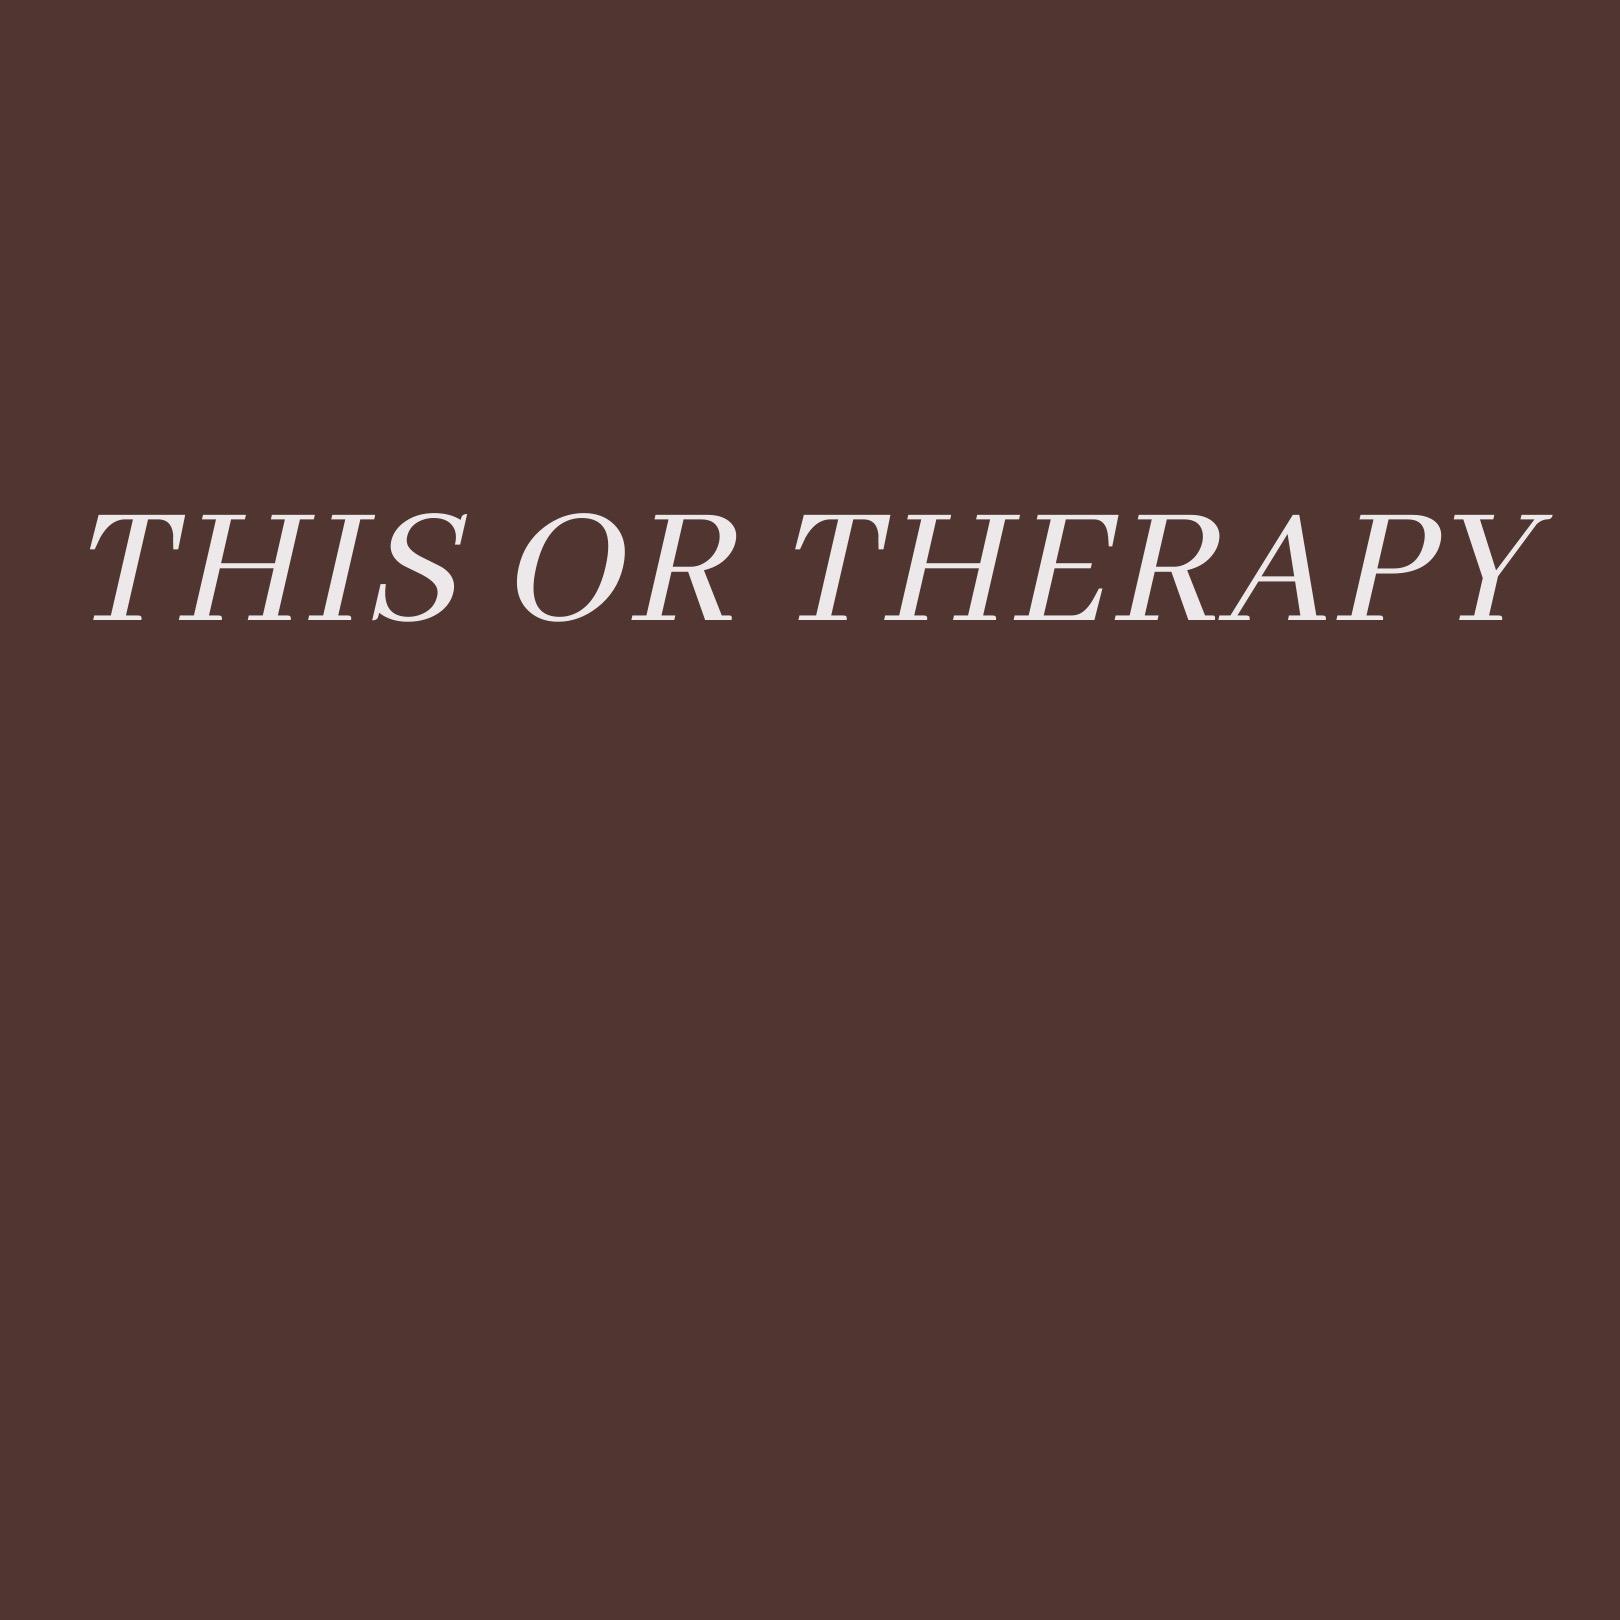 This or Therapy